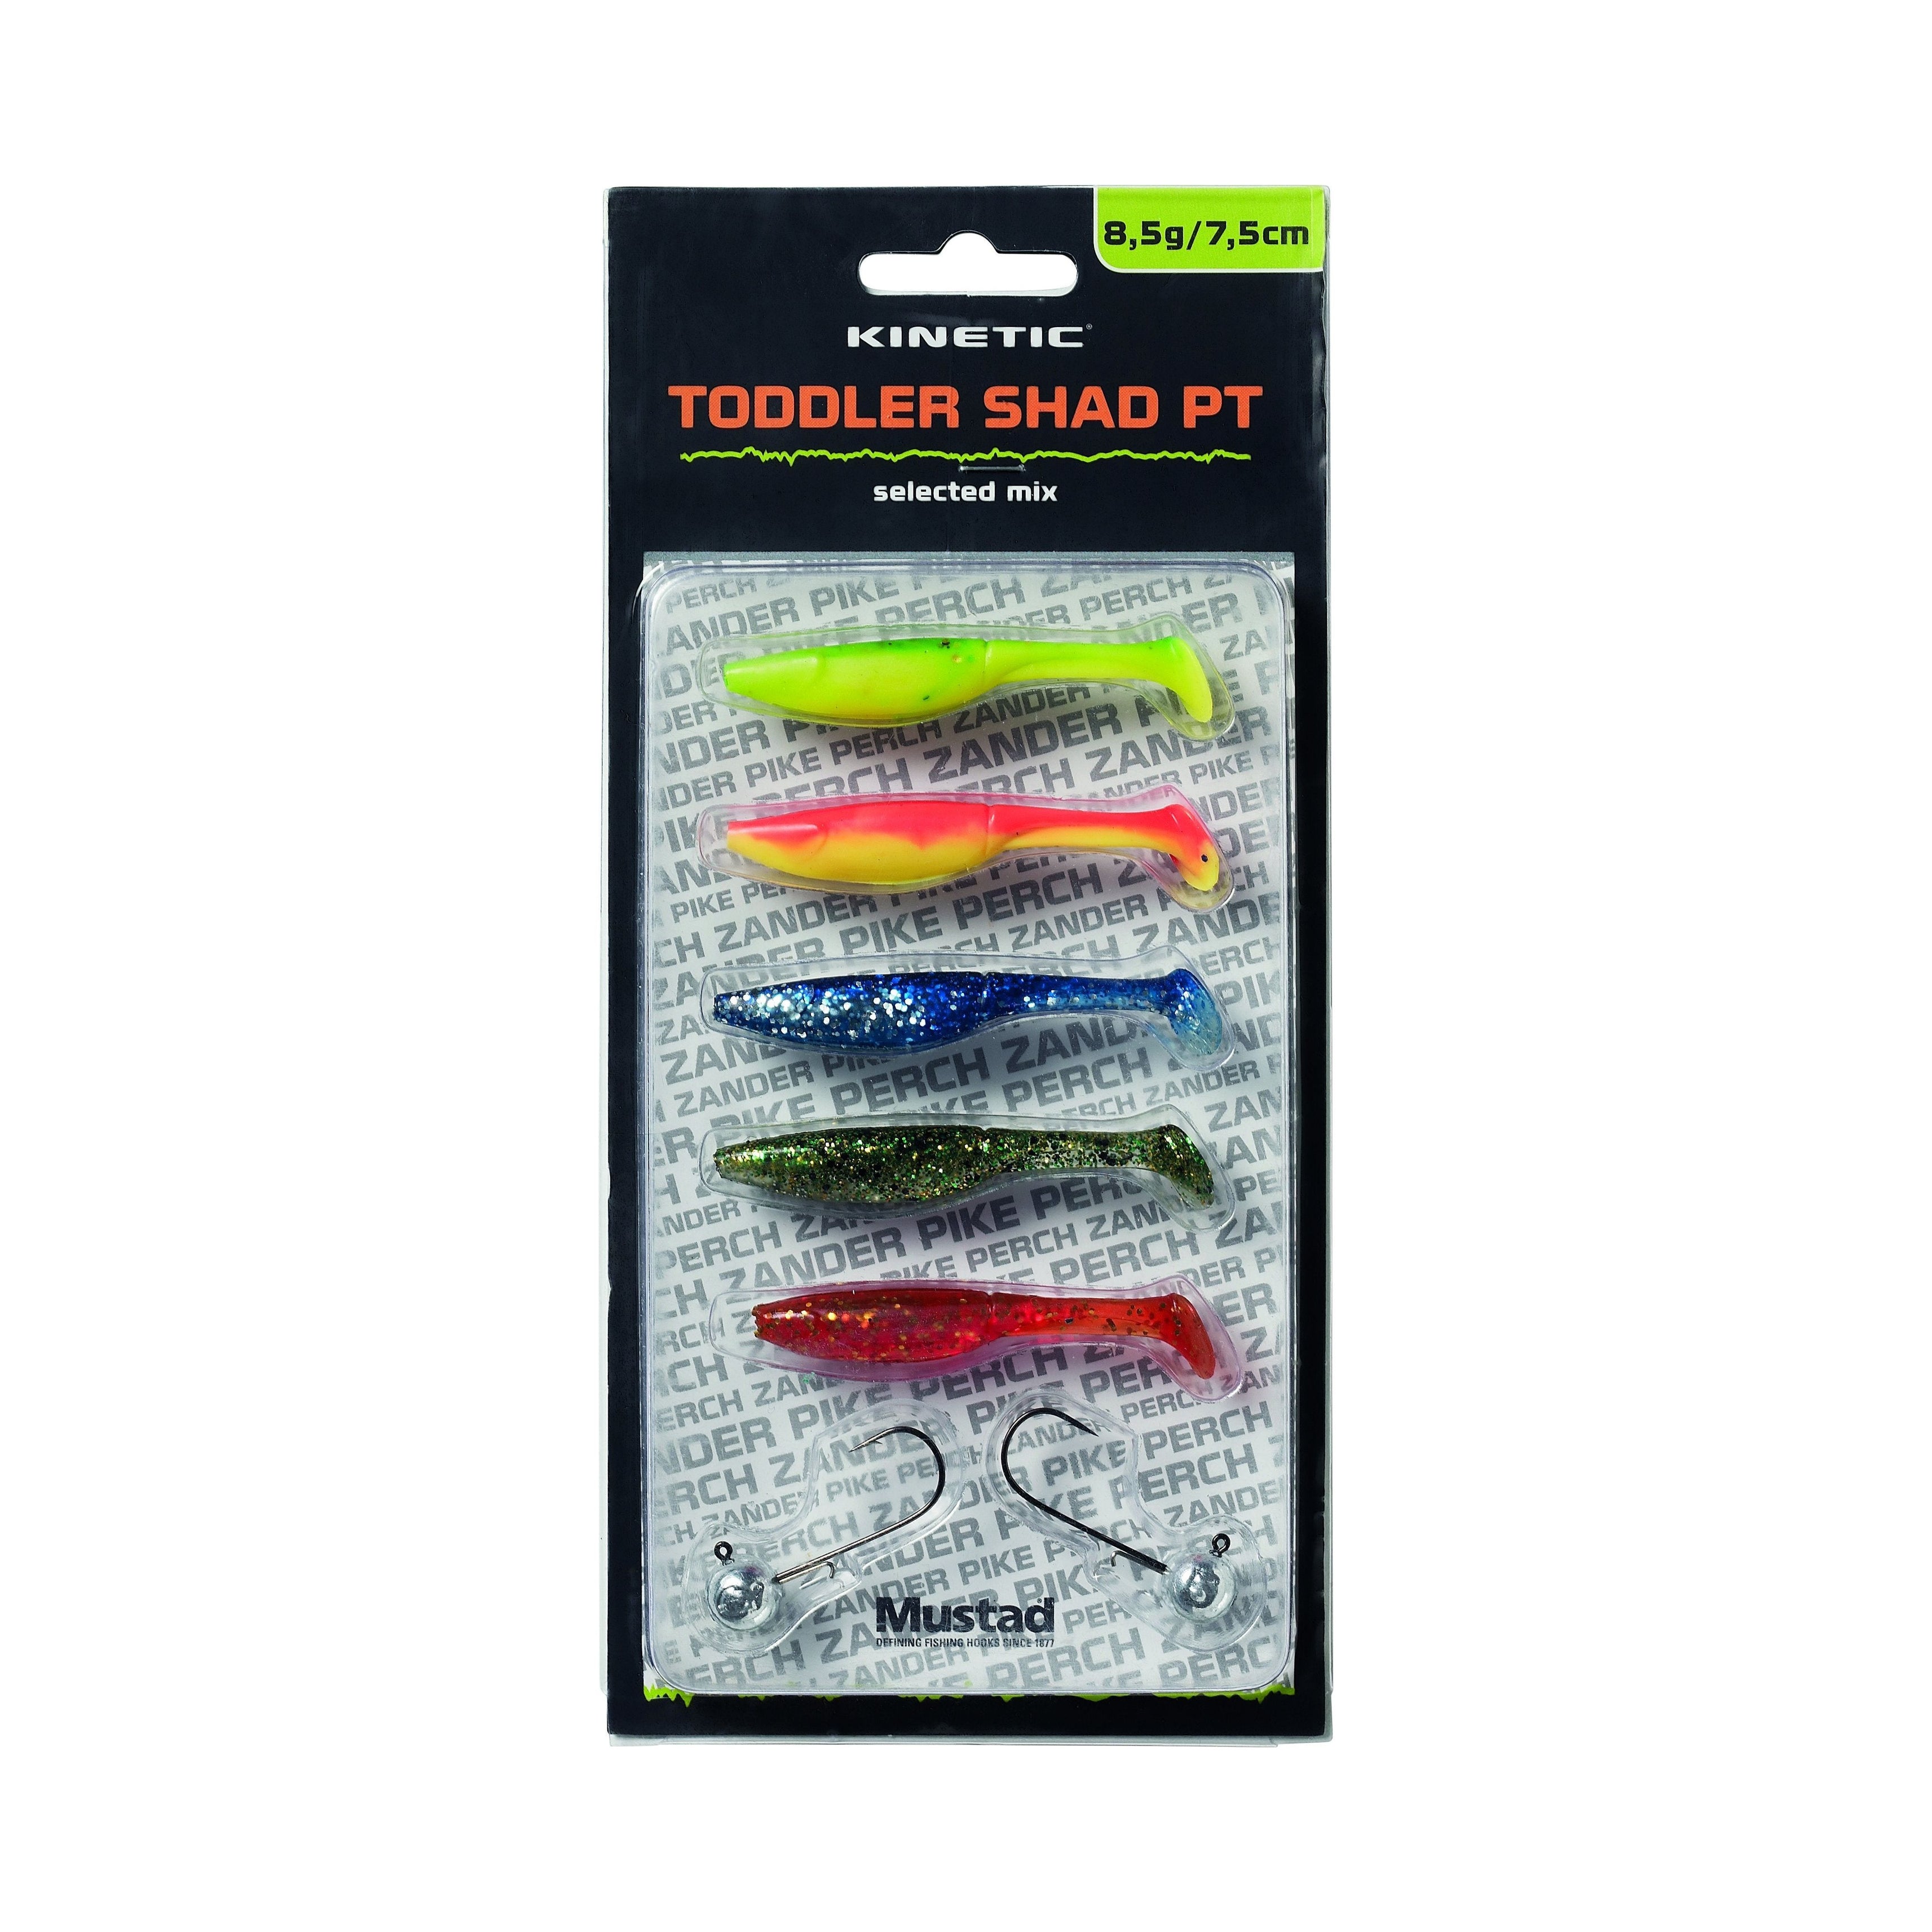 Kinetic Toddler Shad Pt 8.5G 7.5cm Selected Mix